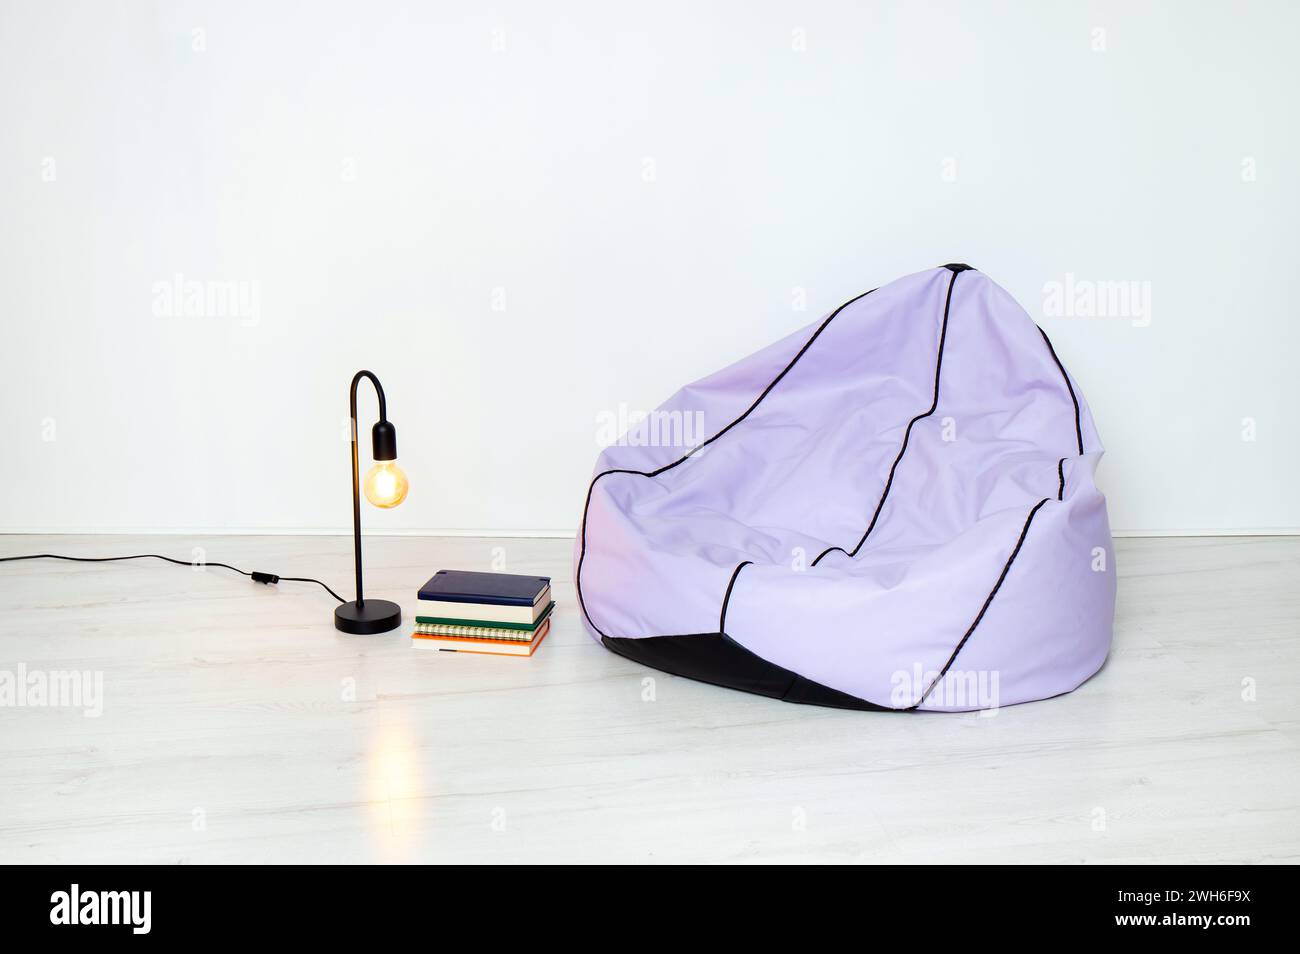 Minimalist home concept. Purple bean bag, black metal lamp and stack of books in metal wire basket, white walls and floor. Less is more. Stock Photo